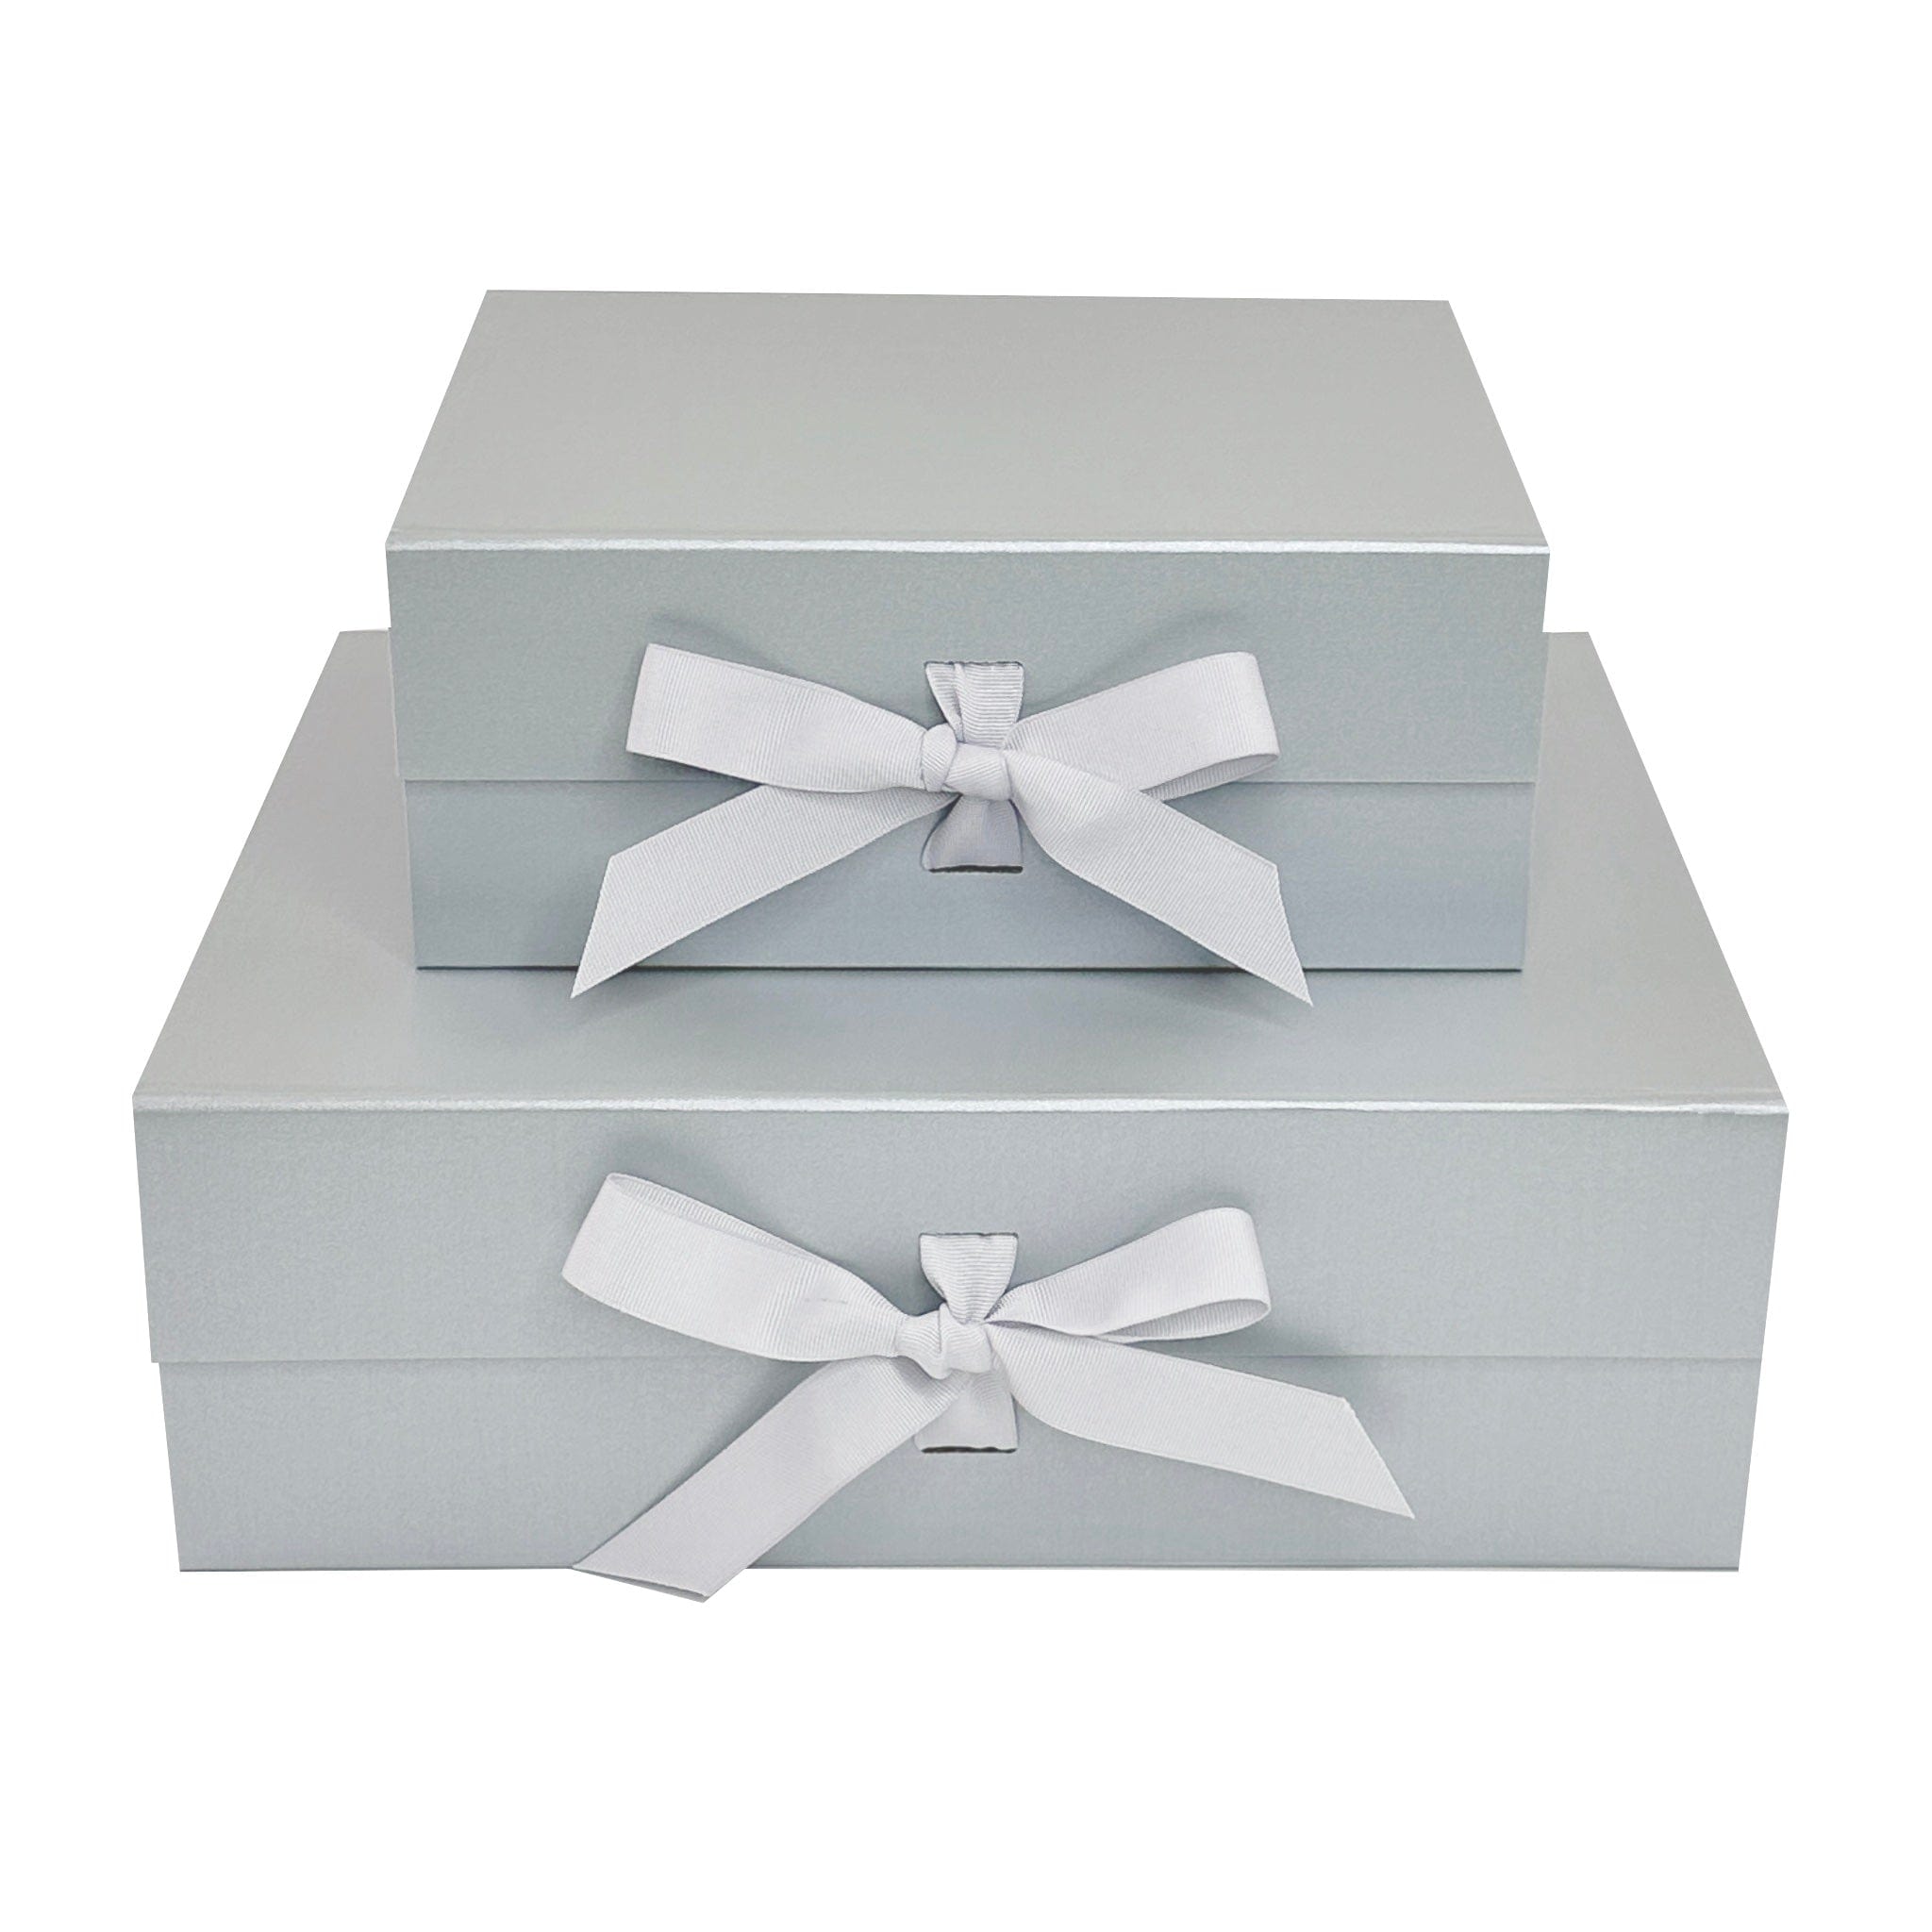 Custom Gift Boxes | Customized Gift Boxes | Gift Boxes Wholesale